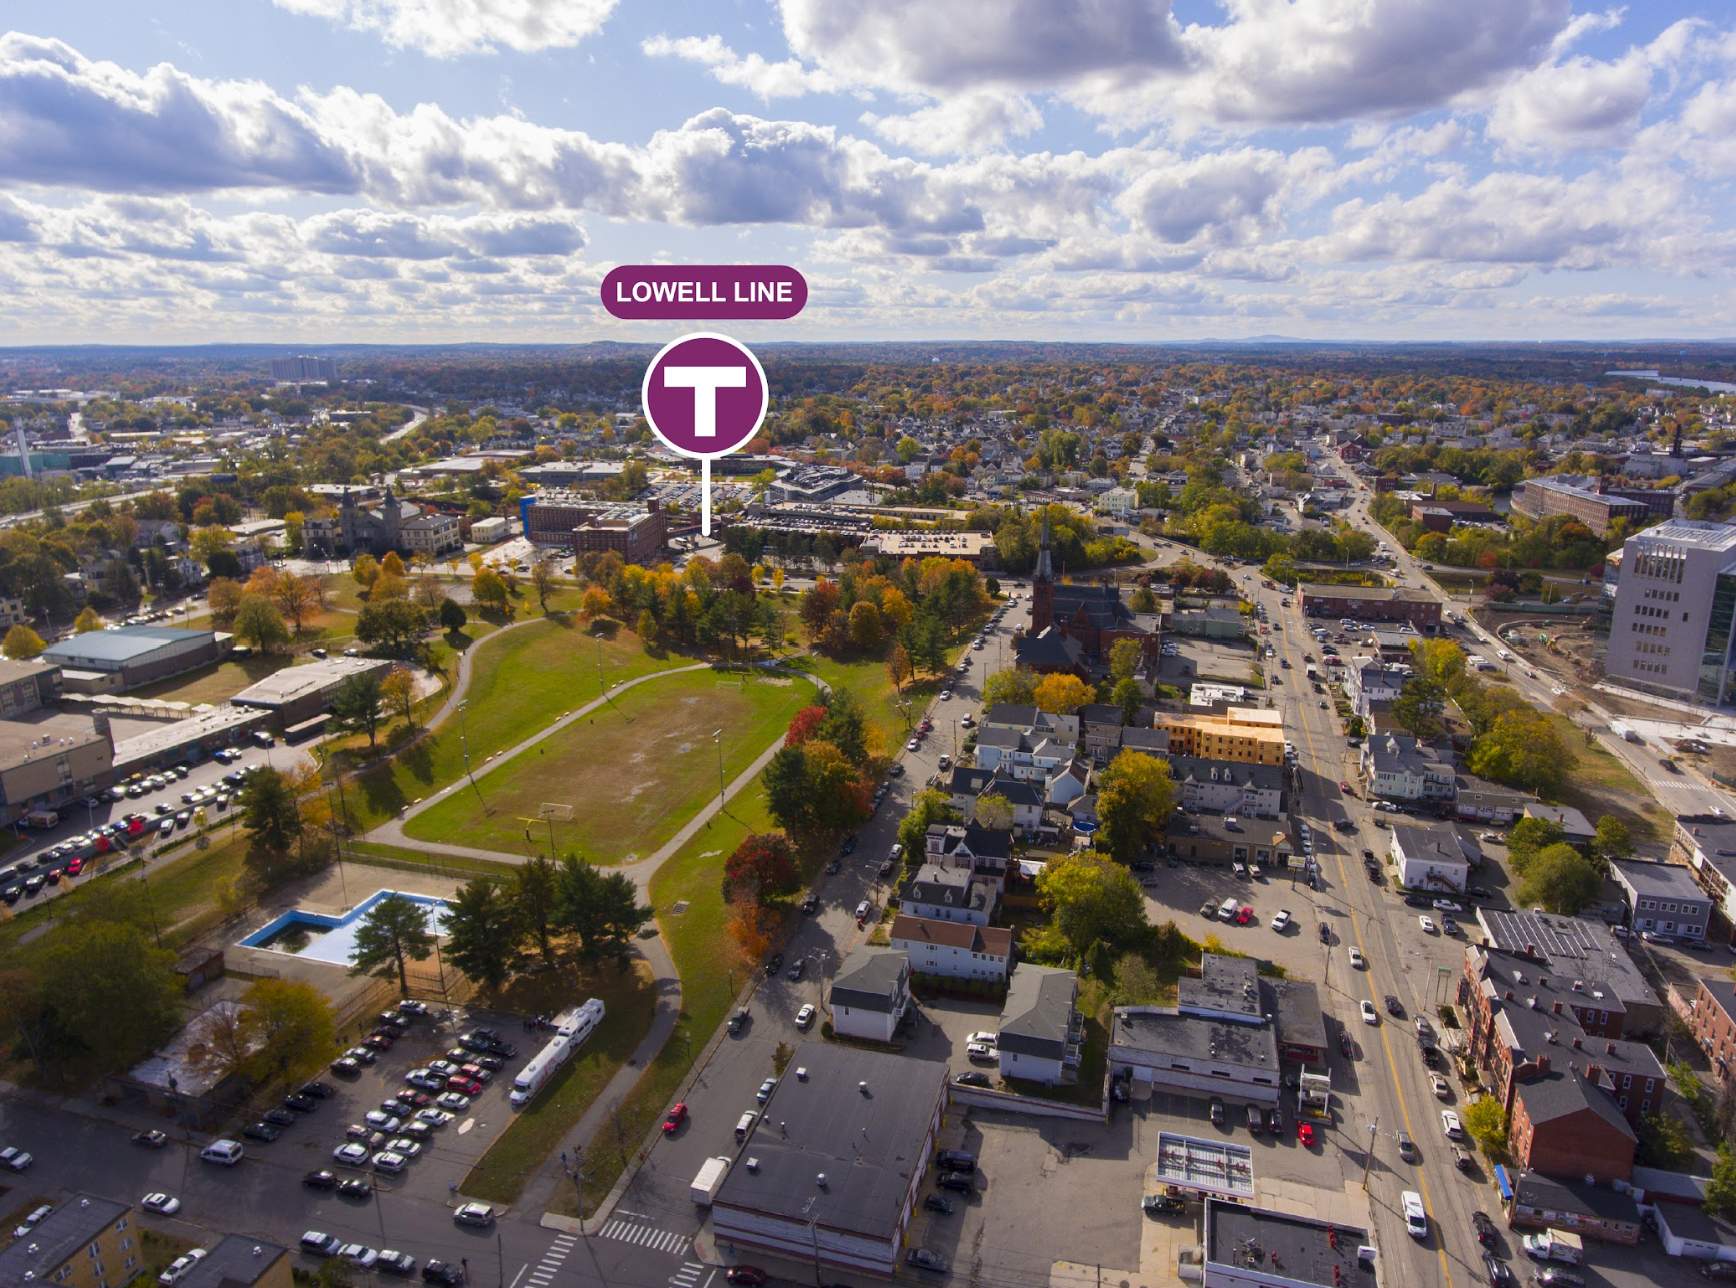 Aerial view of Lowell MBTA station